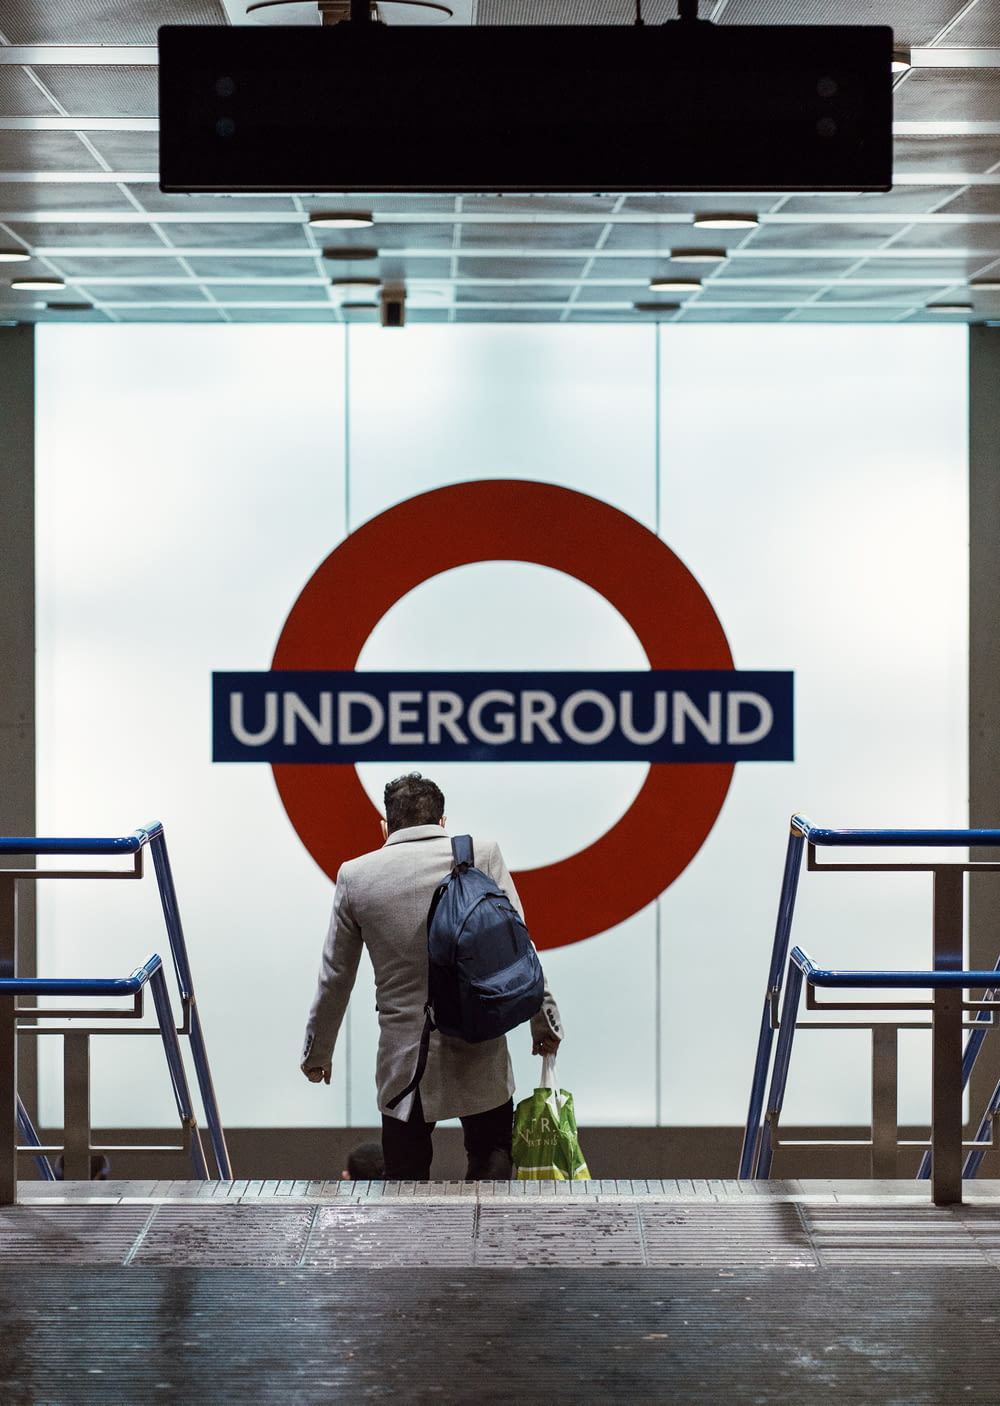 a man with a backpack is standing in front of a underground sign